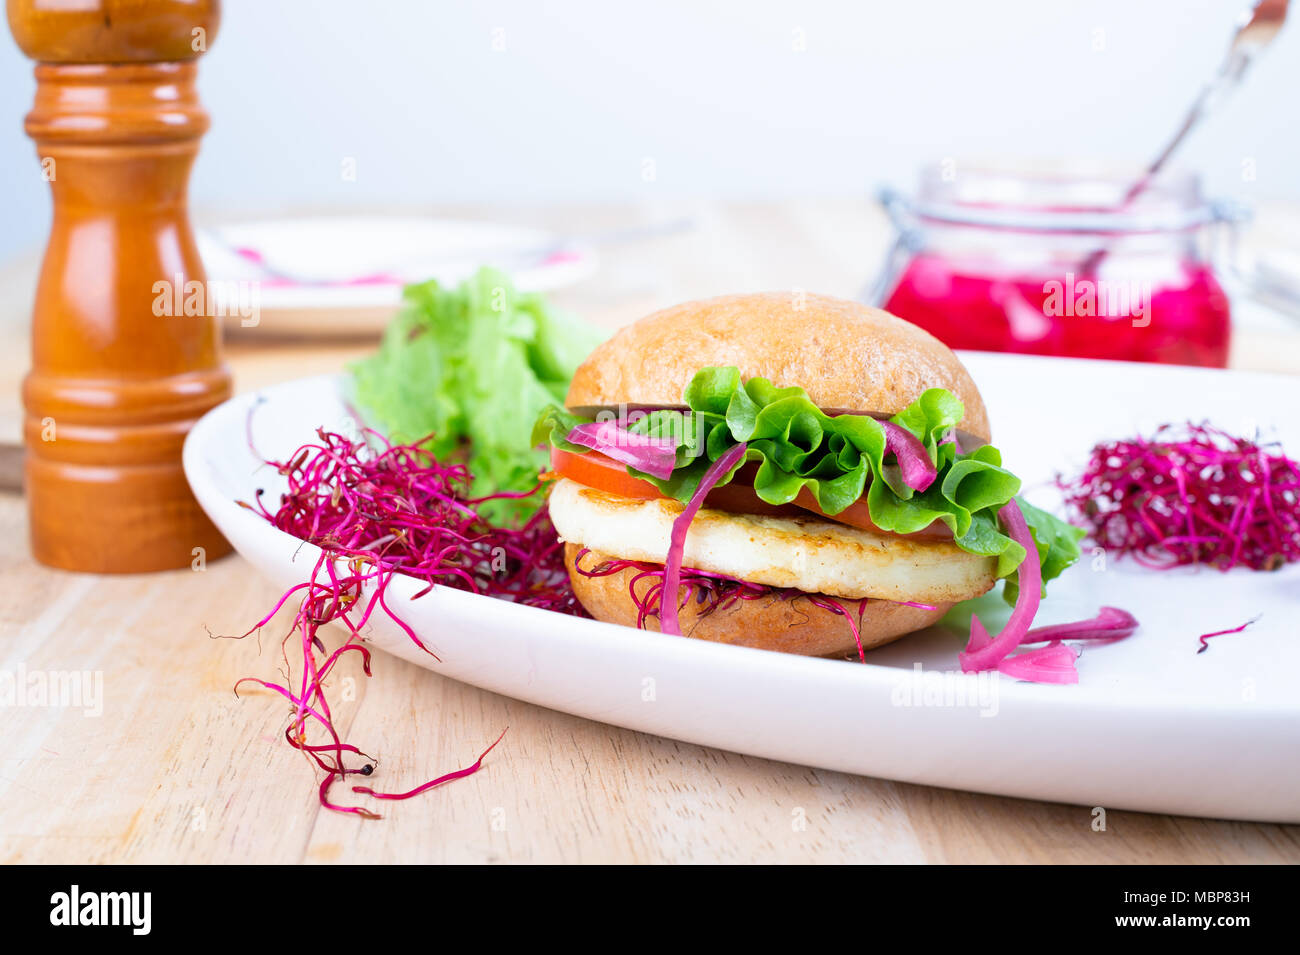 Halloumi burger with lettuce, tomato, pickled red onion and beet sprouts. Stock Photo